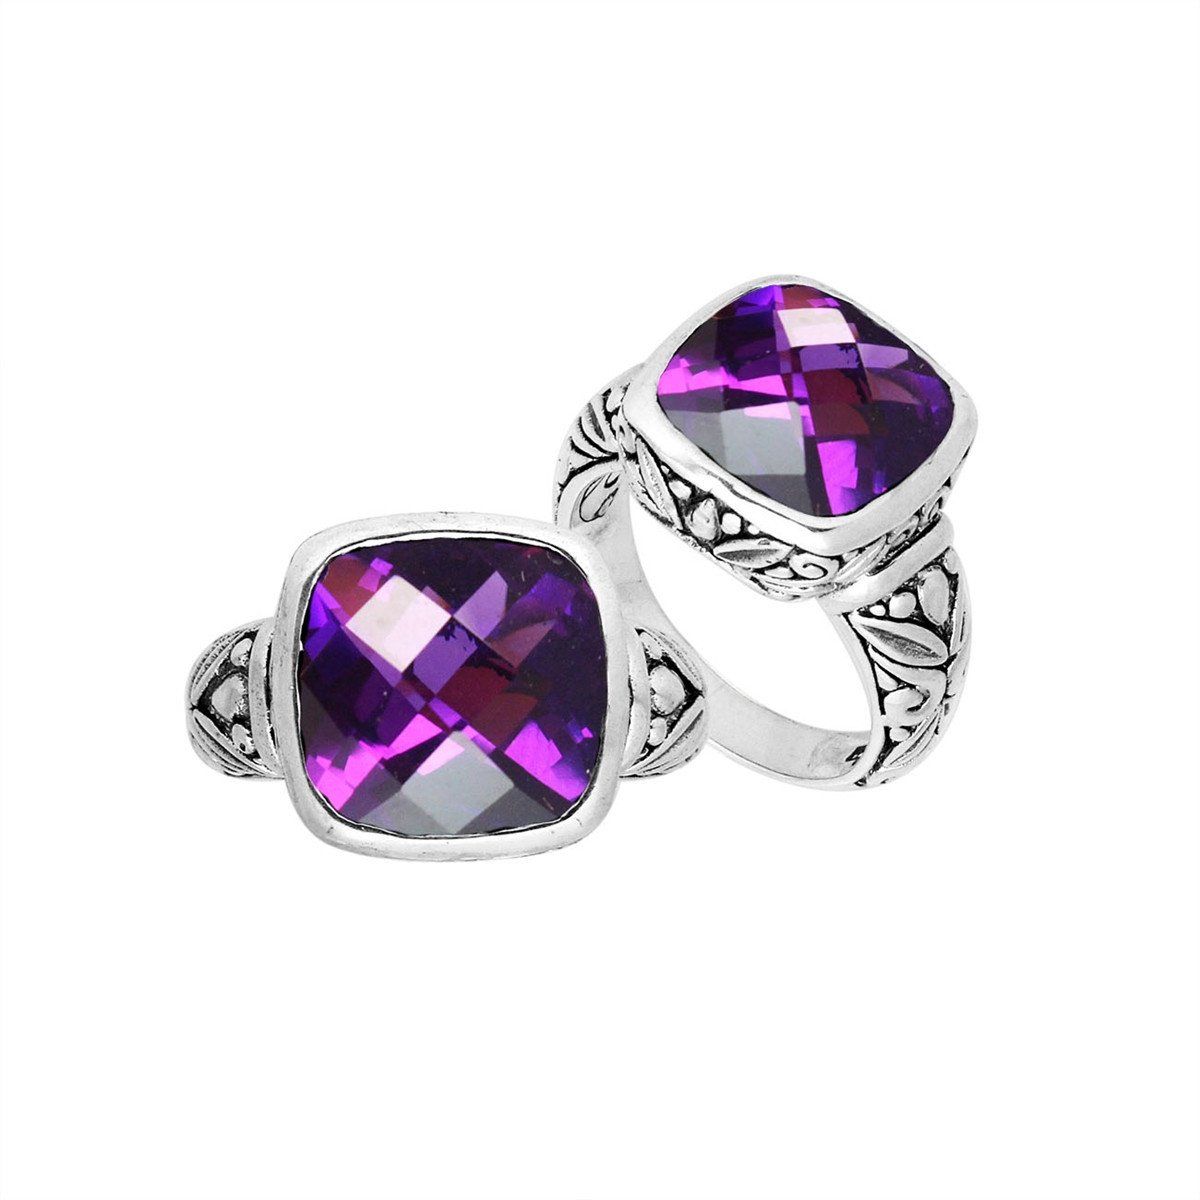 AR-8004-AM-8 Sterling Silver Ring With Amethyst Q.